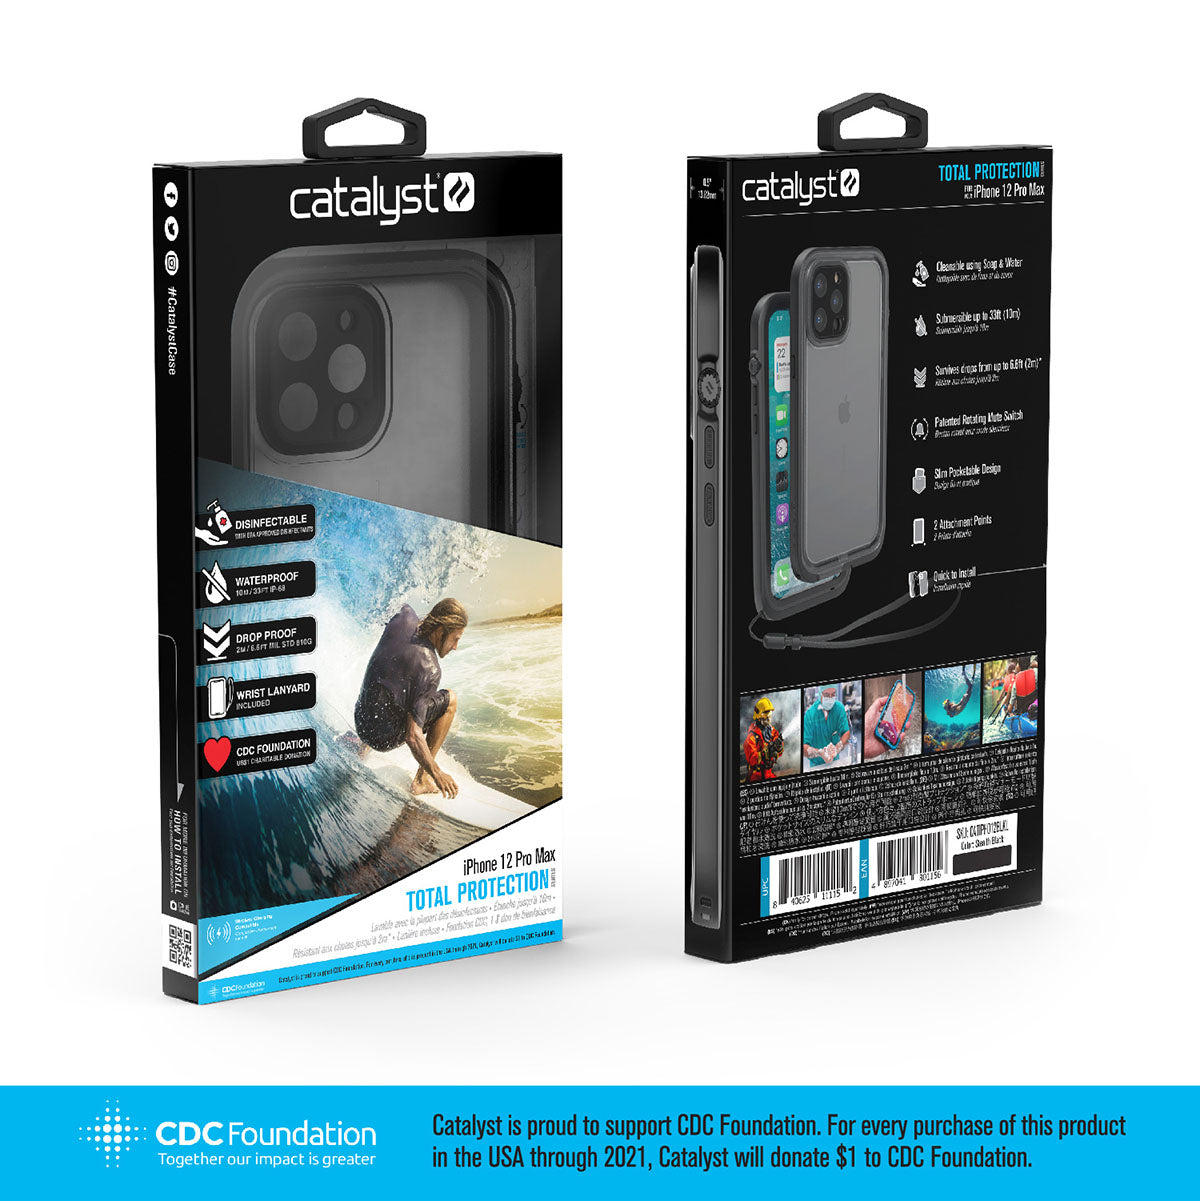 Catalyst iPhone 12 Pro Max waterproof case total protection sample packaging